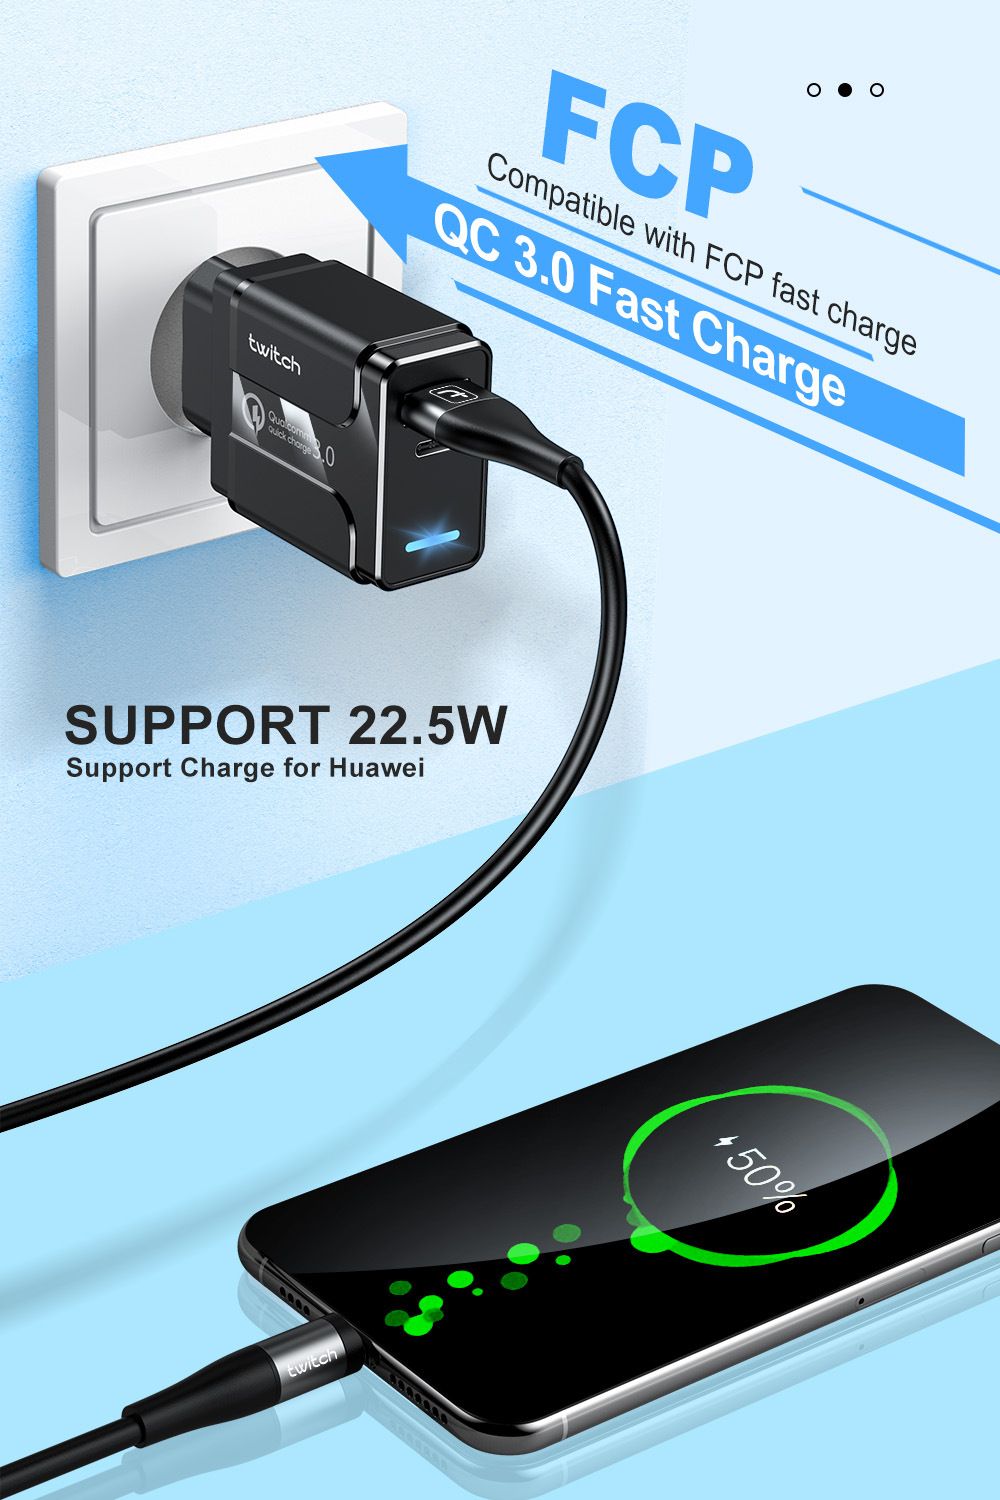 Twitch-Type-C-USB-Charger-36W-QC30-PD-Fast-Charging-For-iPhone-XS-11Pro-Huawei-P30-Pro-Mate-30-Mi10--1666588